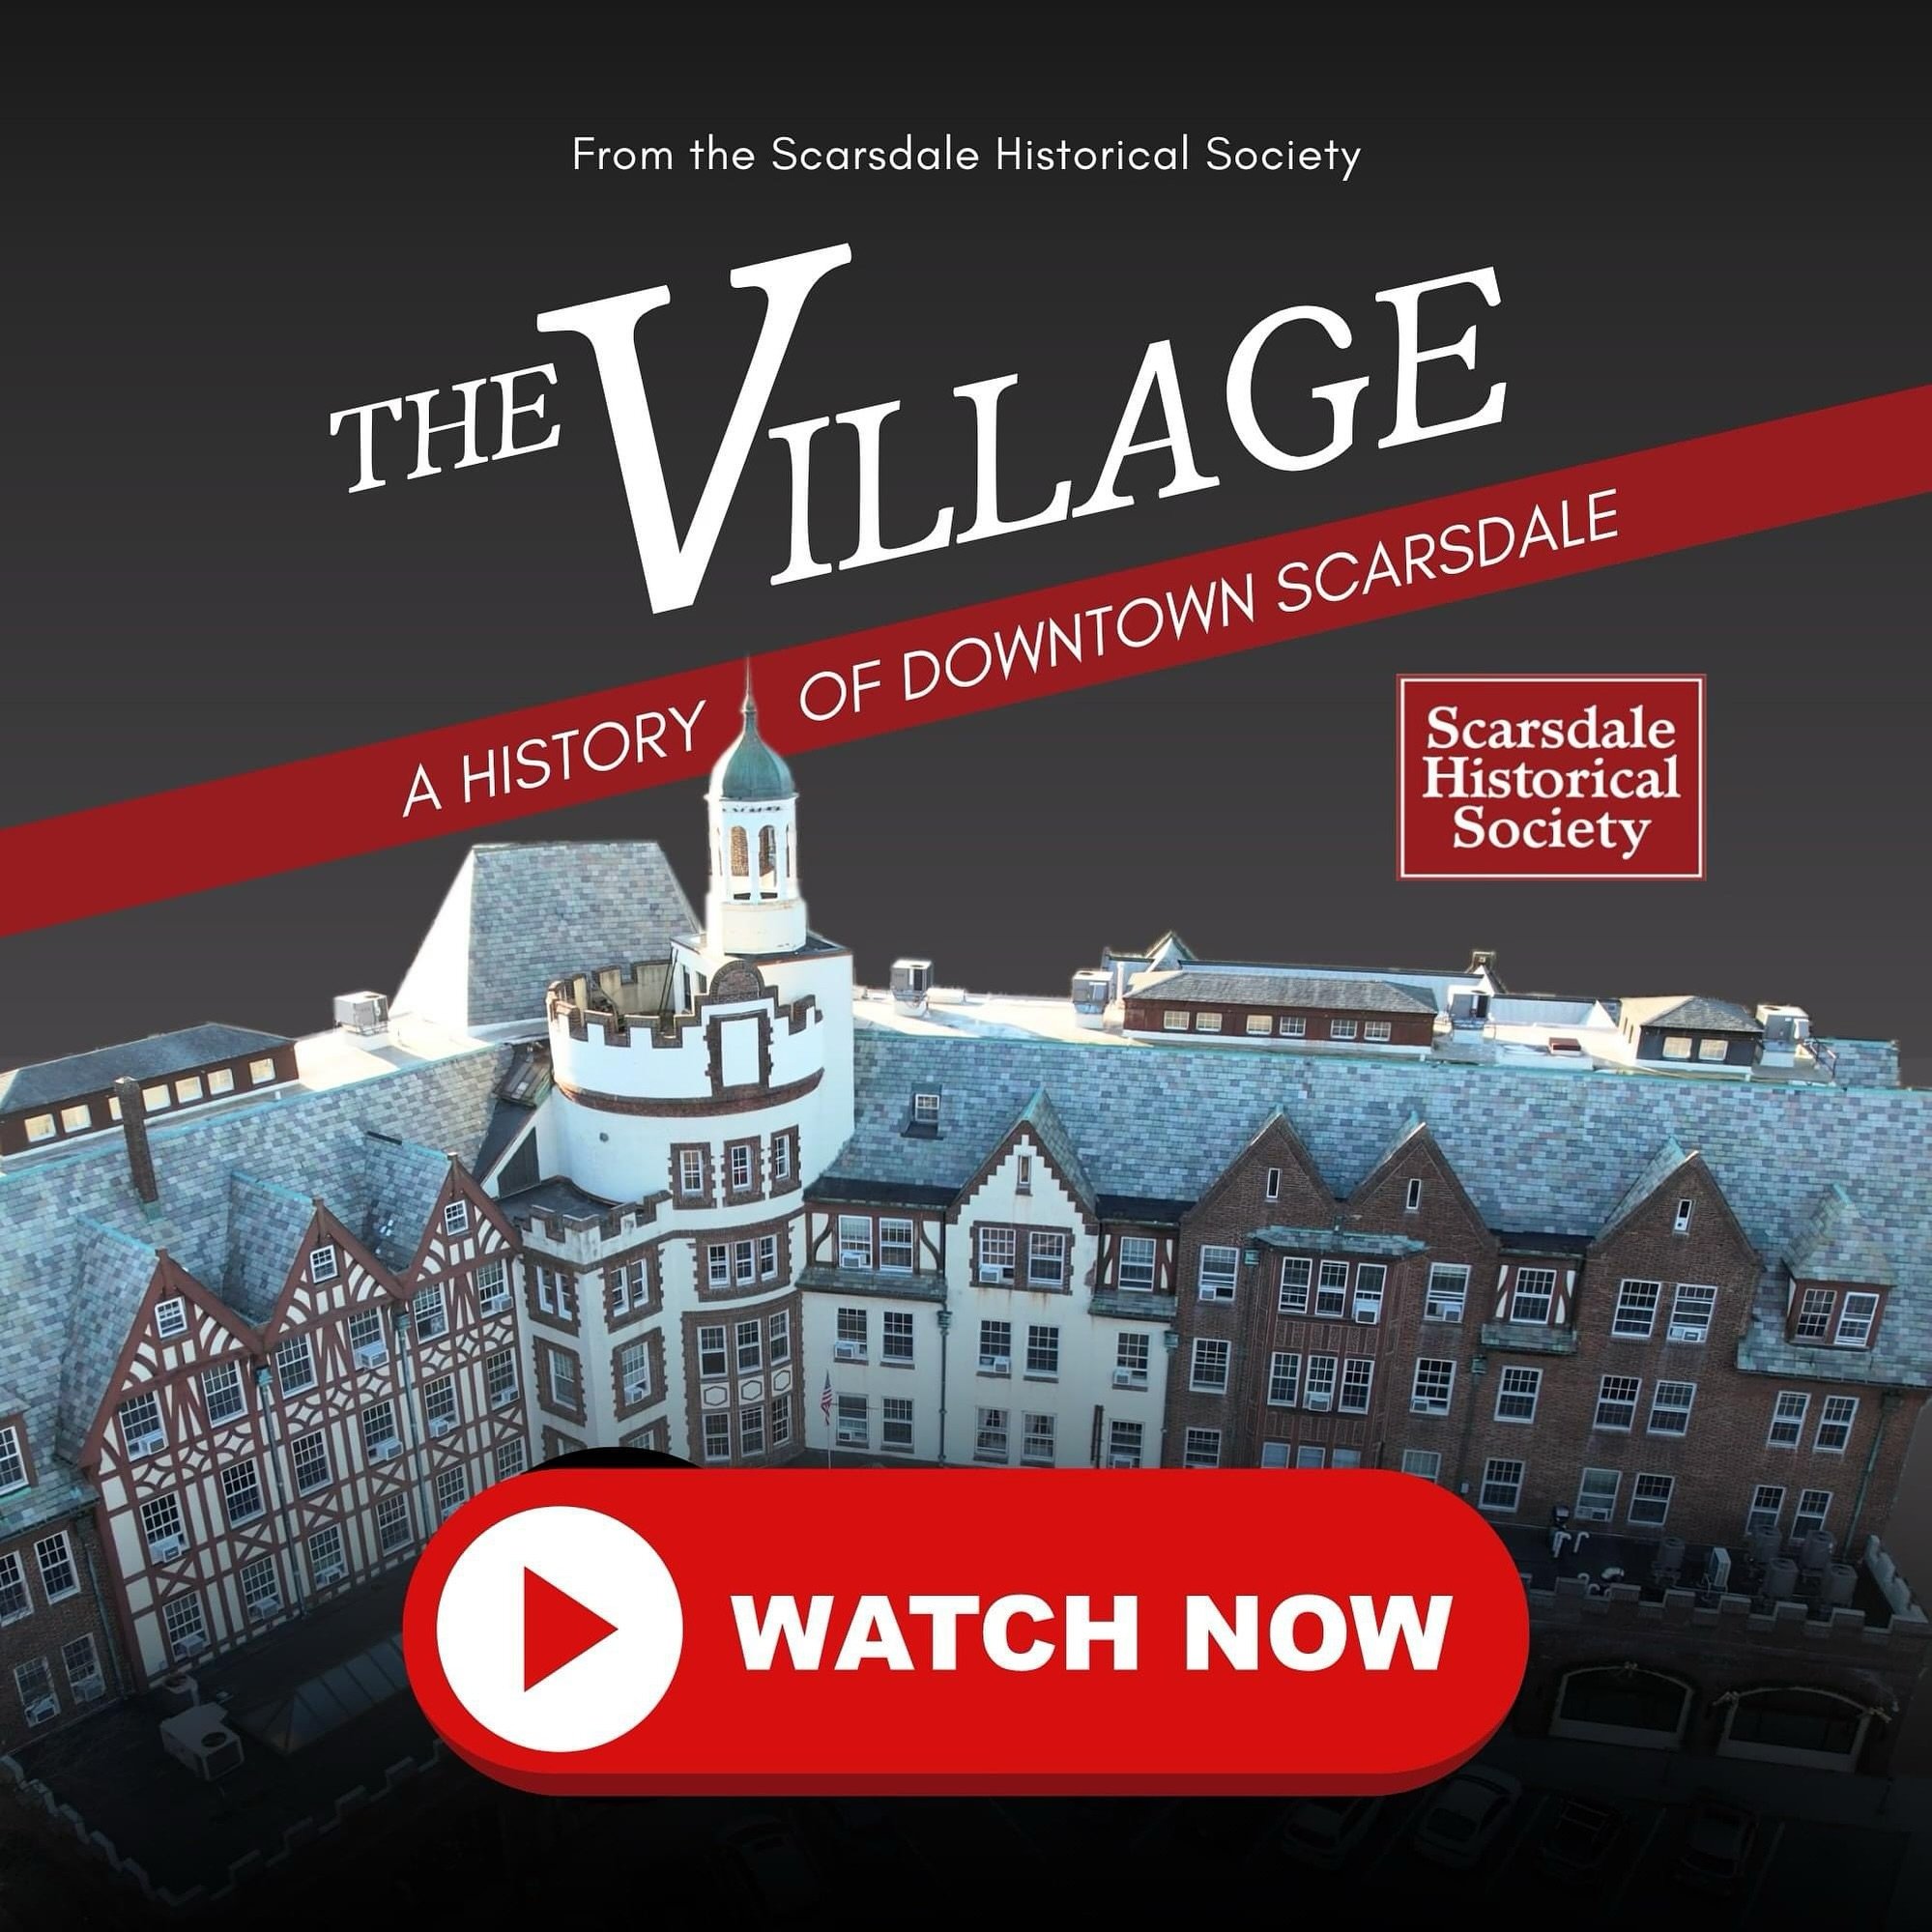 It&rsquo;s up! Watch now: &ldquo;The Village: A History of Downtown Scarsdale&rdquo; - at link in bio.

About the film: Take a historic journey through Scarsdale&rsquo;s business district and learn how it expanded from a humble train stop into today&